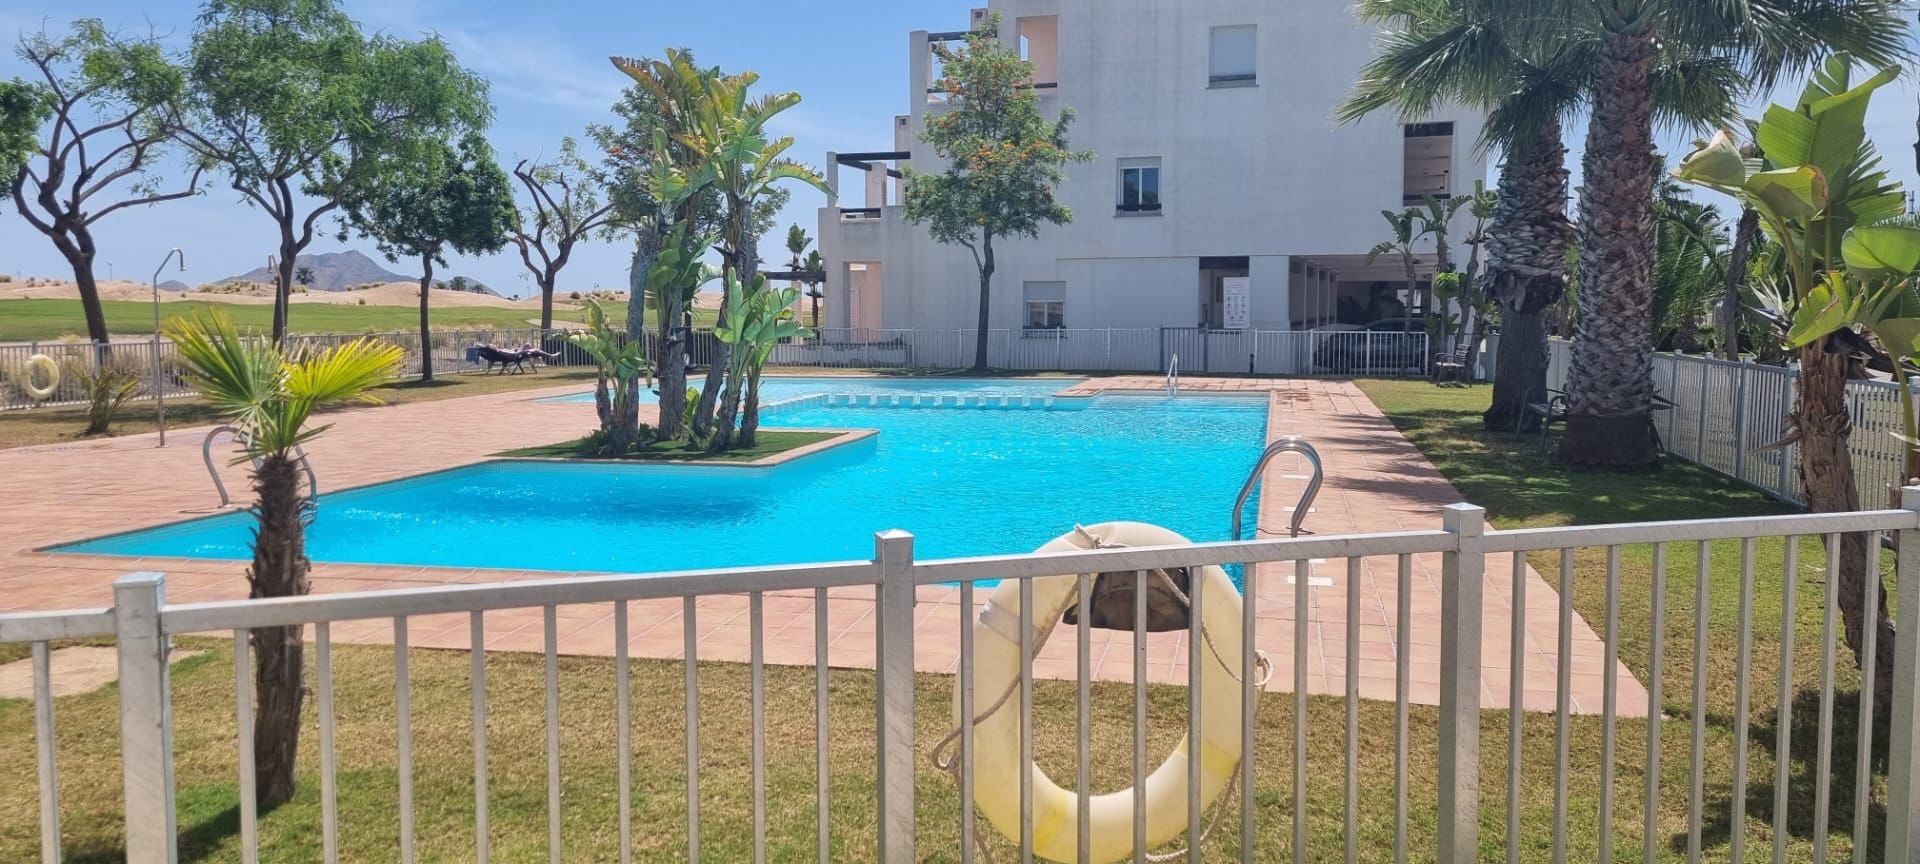 For sale: 2 bedroom apartment / flat in Torre-Pacheco, Costa Calida